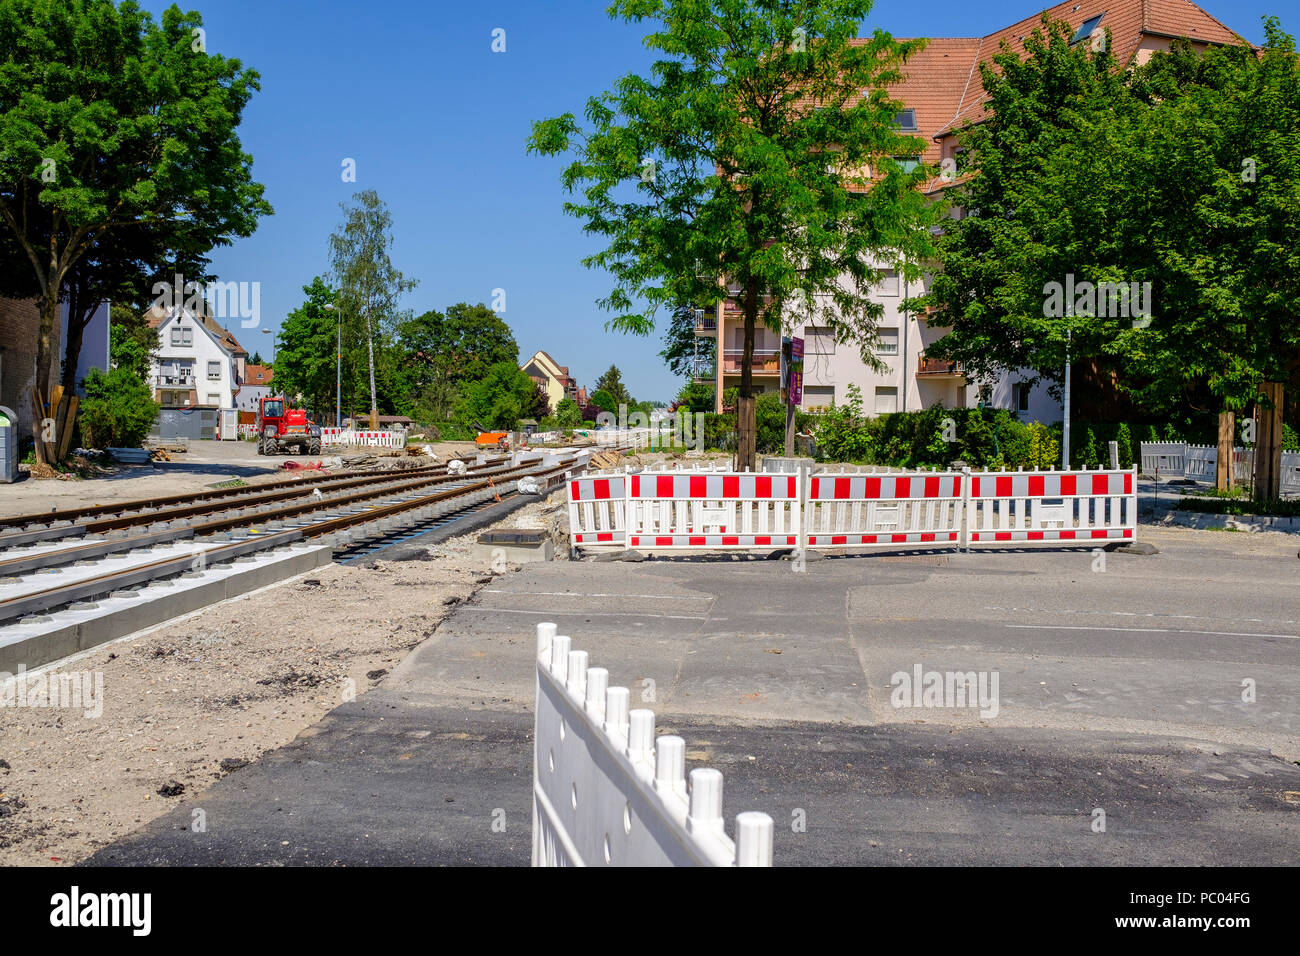 Strasbourg, tram construction site, railway tracks, concrete bed, safety plastic barriers, houses, line E extension, Alsace, France, Europe, Stock Photo